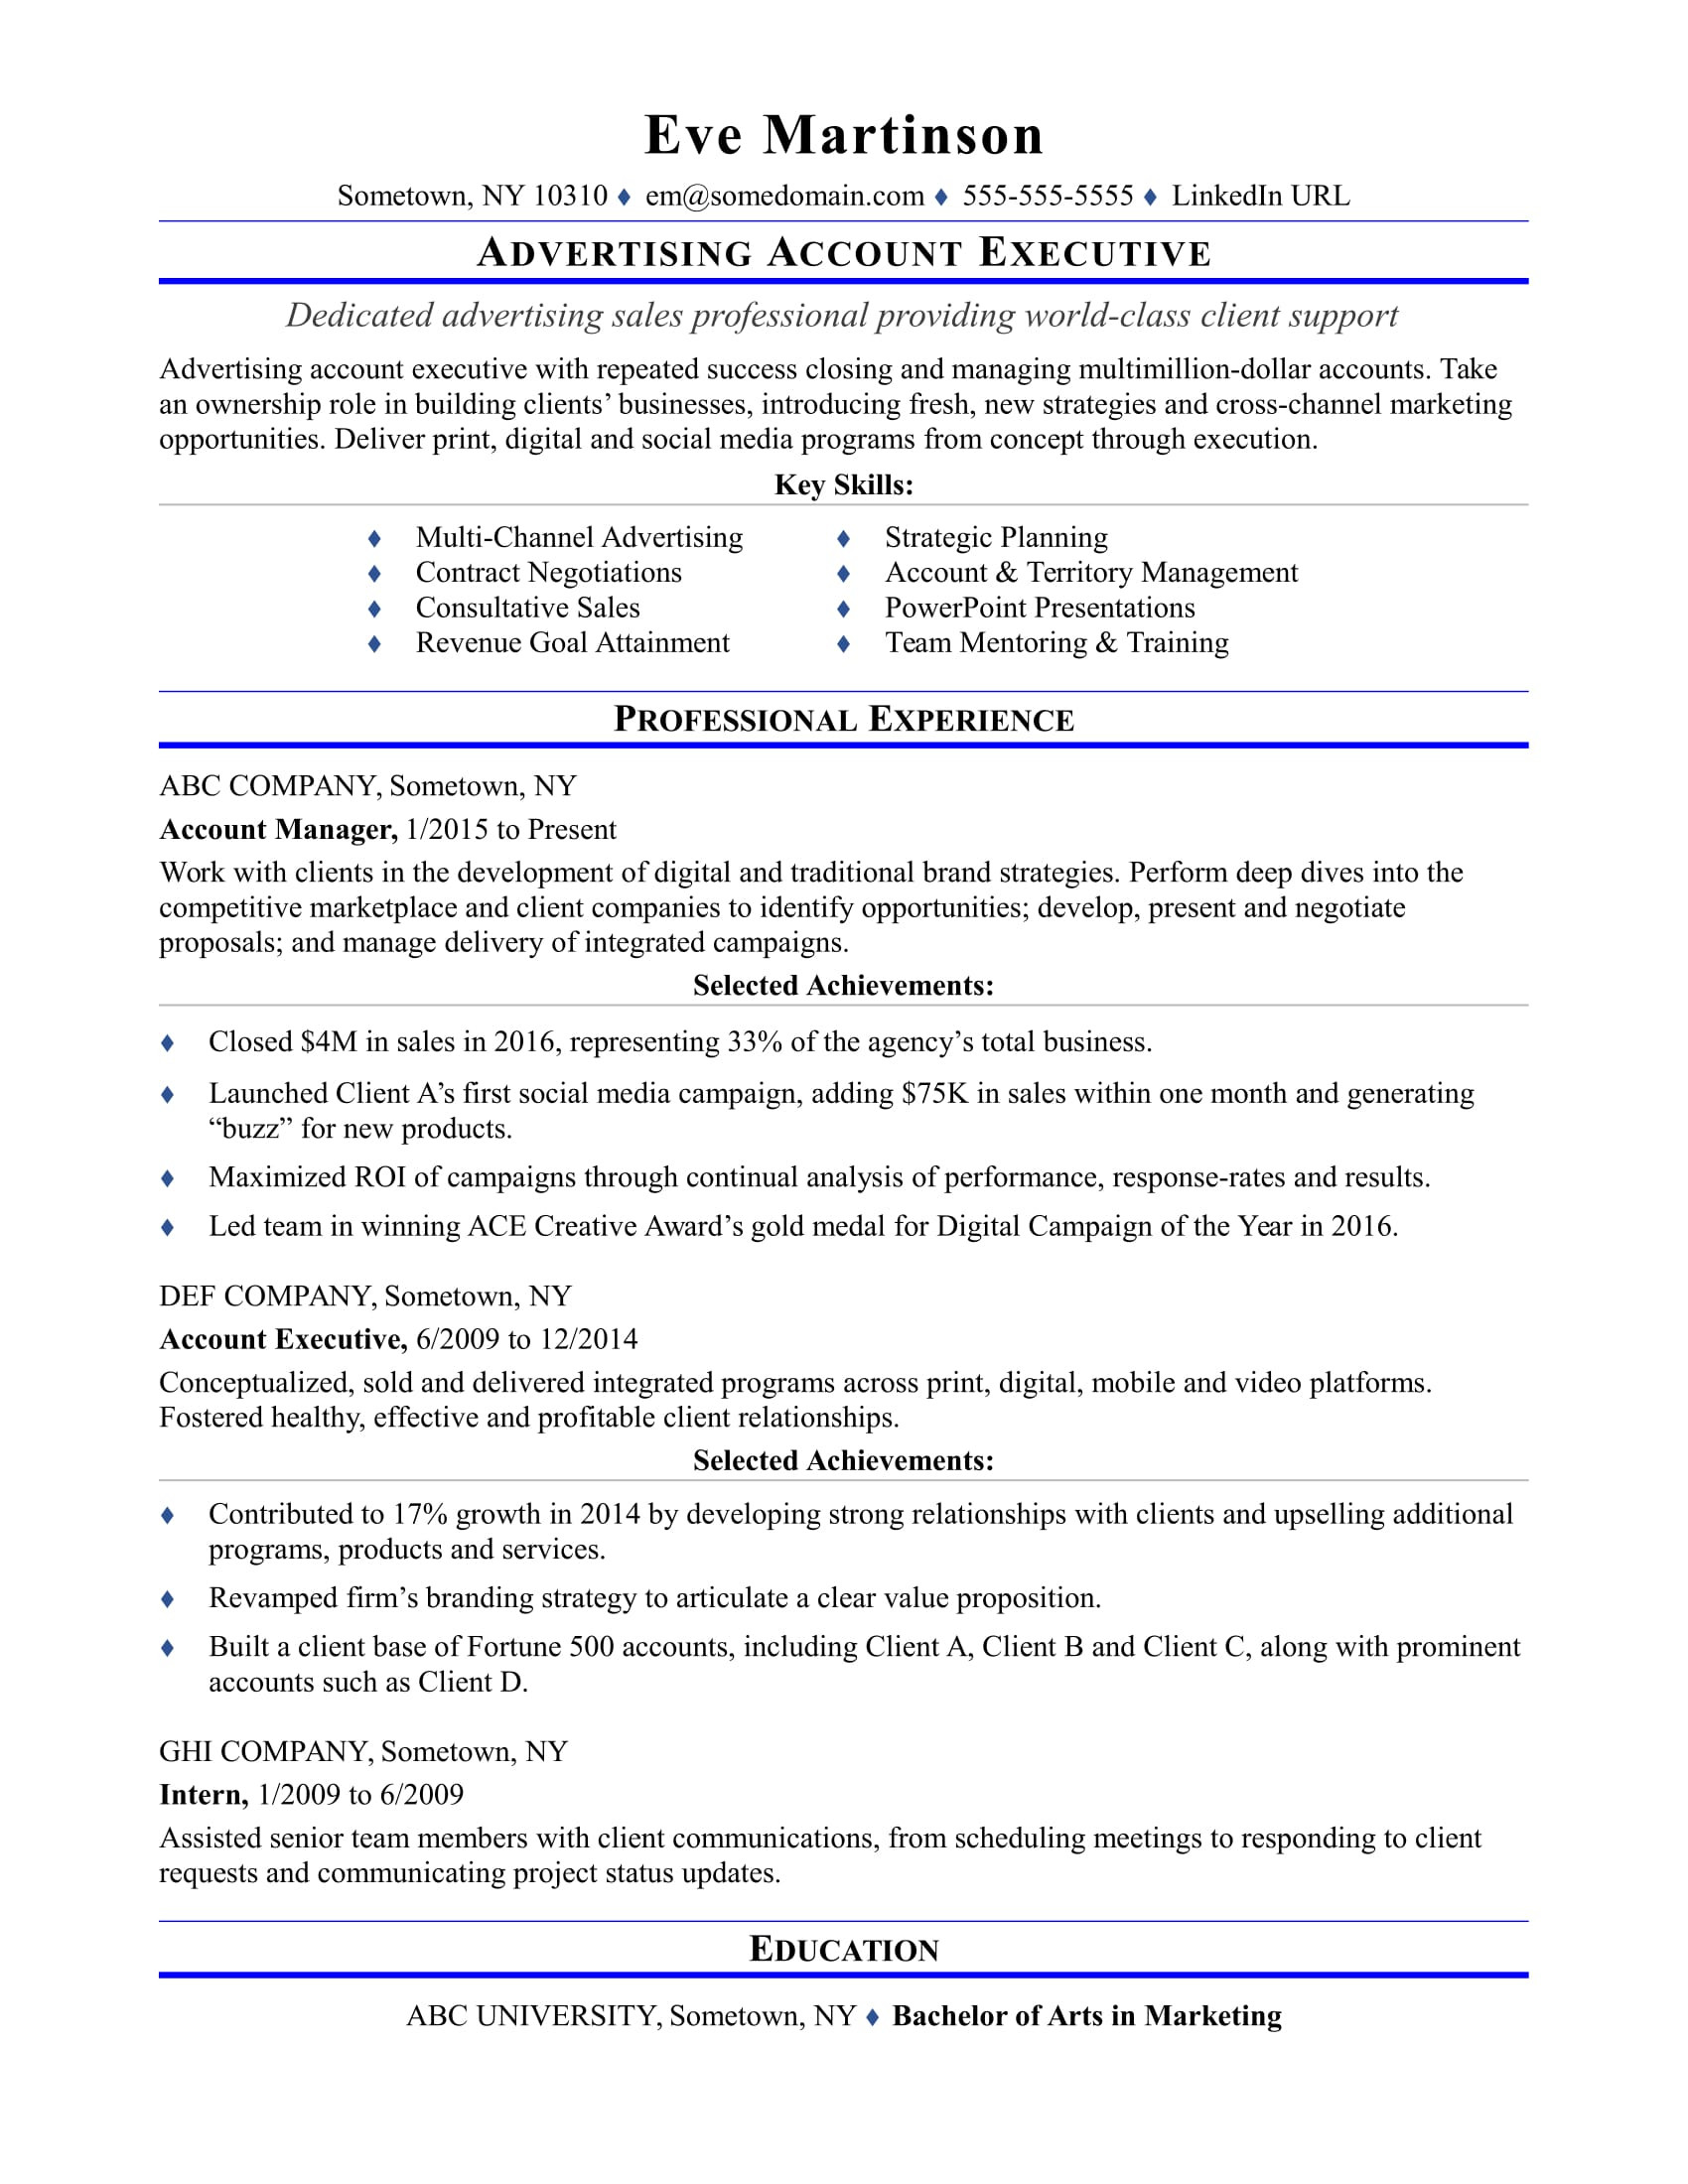 Employment Agency Jobs On Resume Samples Sample Resume for An Advertising Account Executive Monster.com